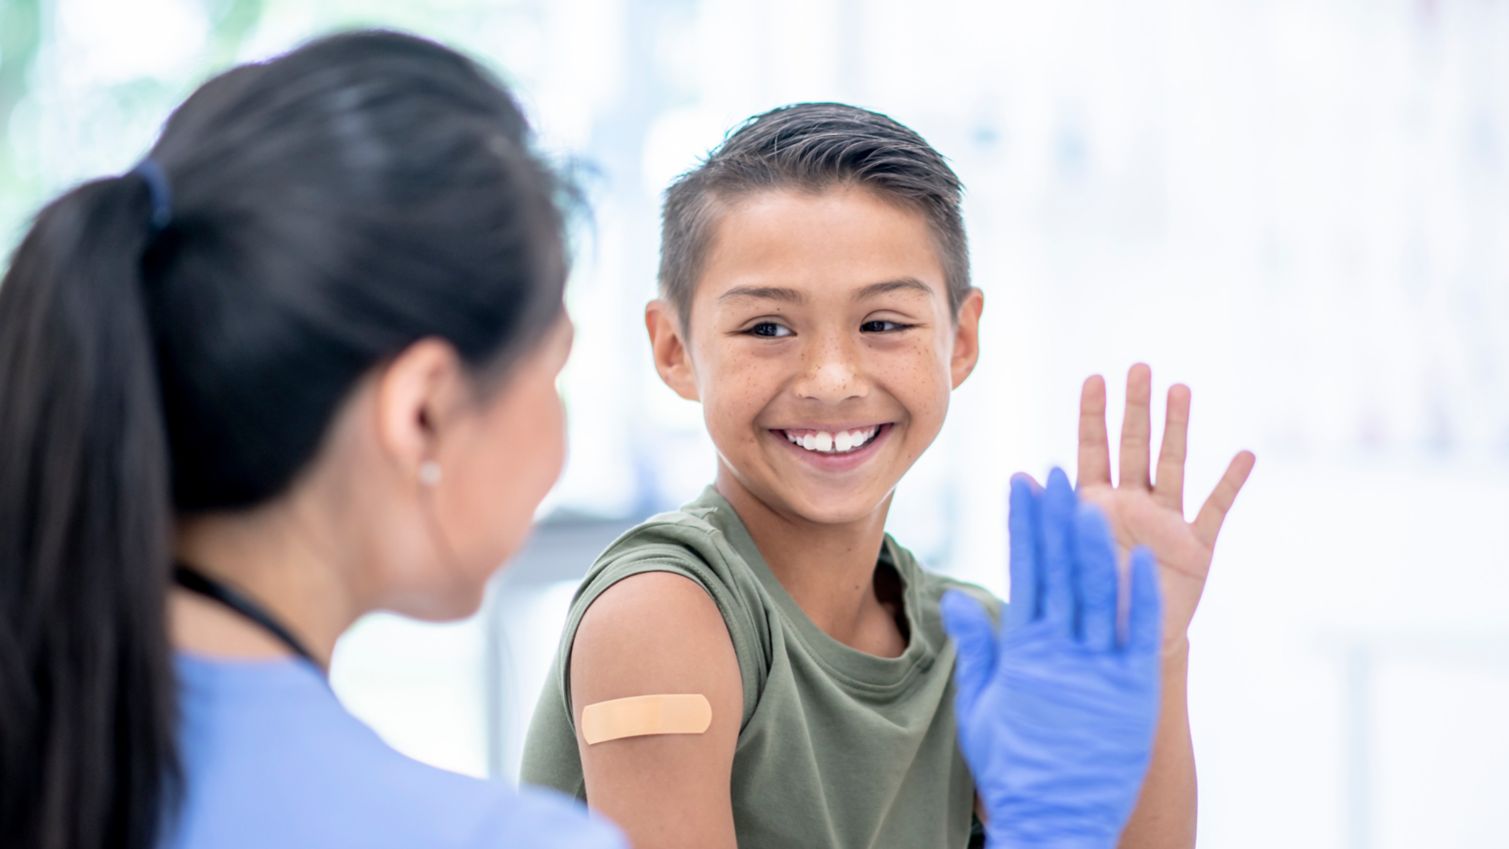 Doctor high-fives young patient after vaccination